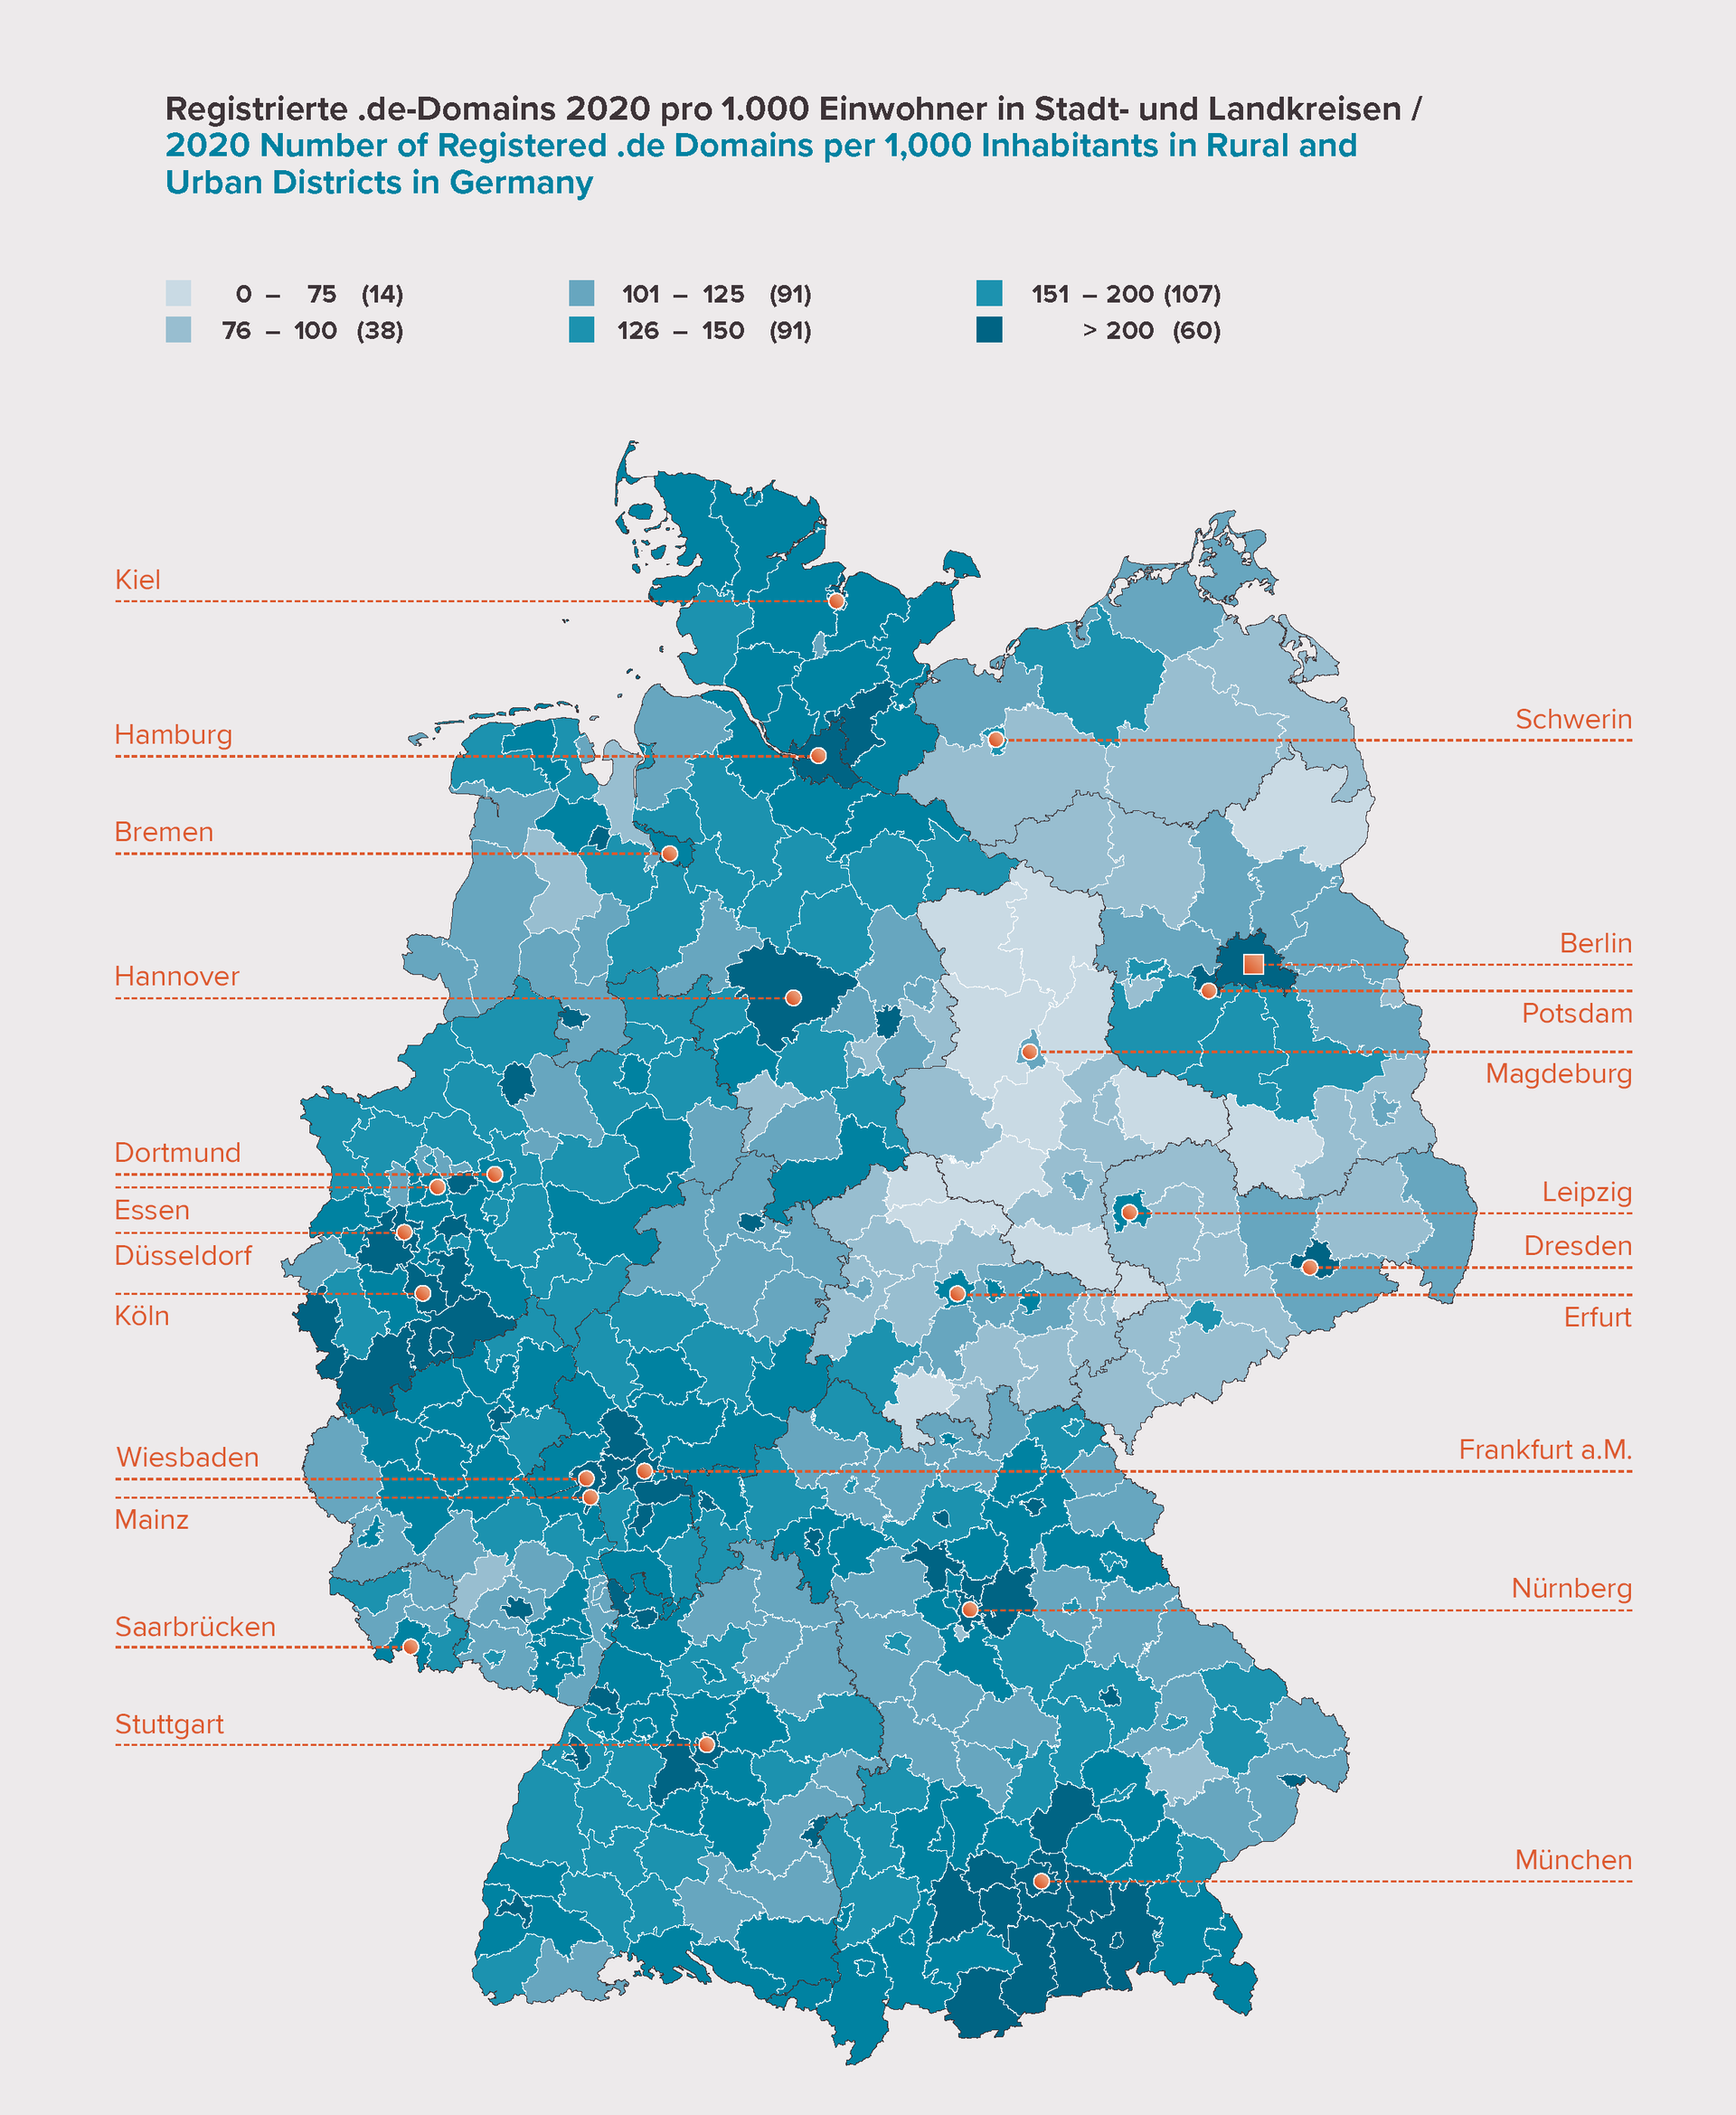 Number of Registered .de Domains per 1,000 Inhabitants in Rural and Urban District in Germany 2020